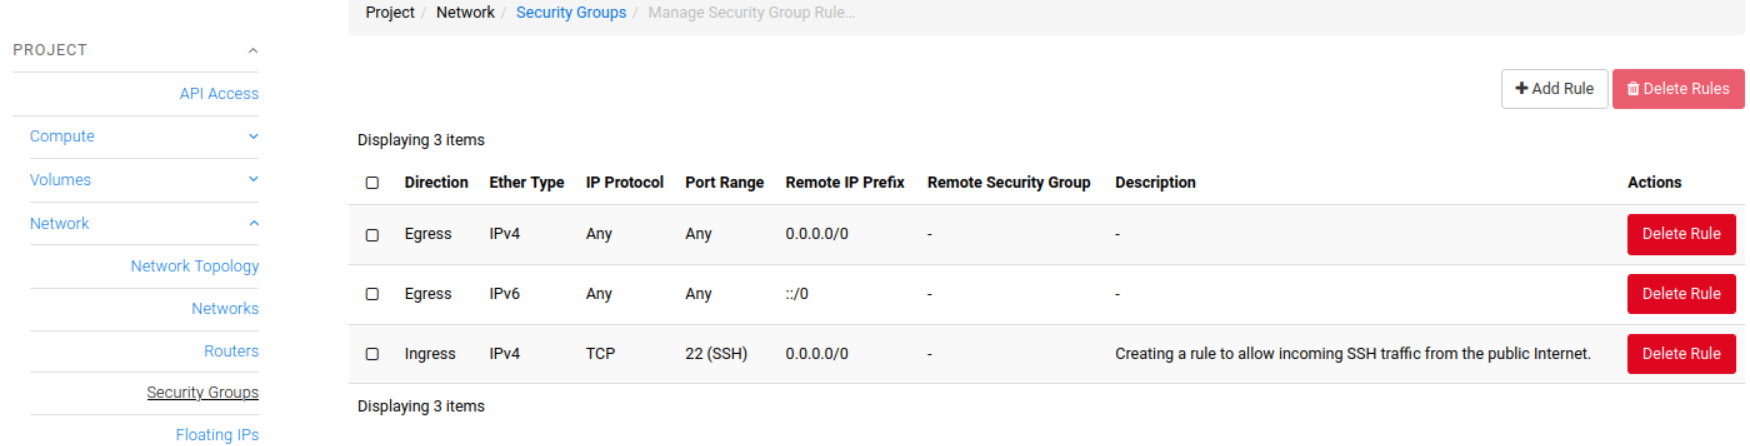 manage security group rules